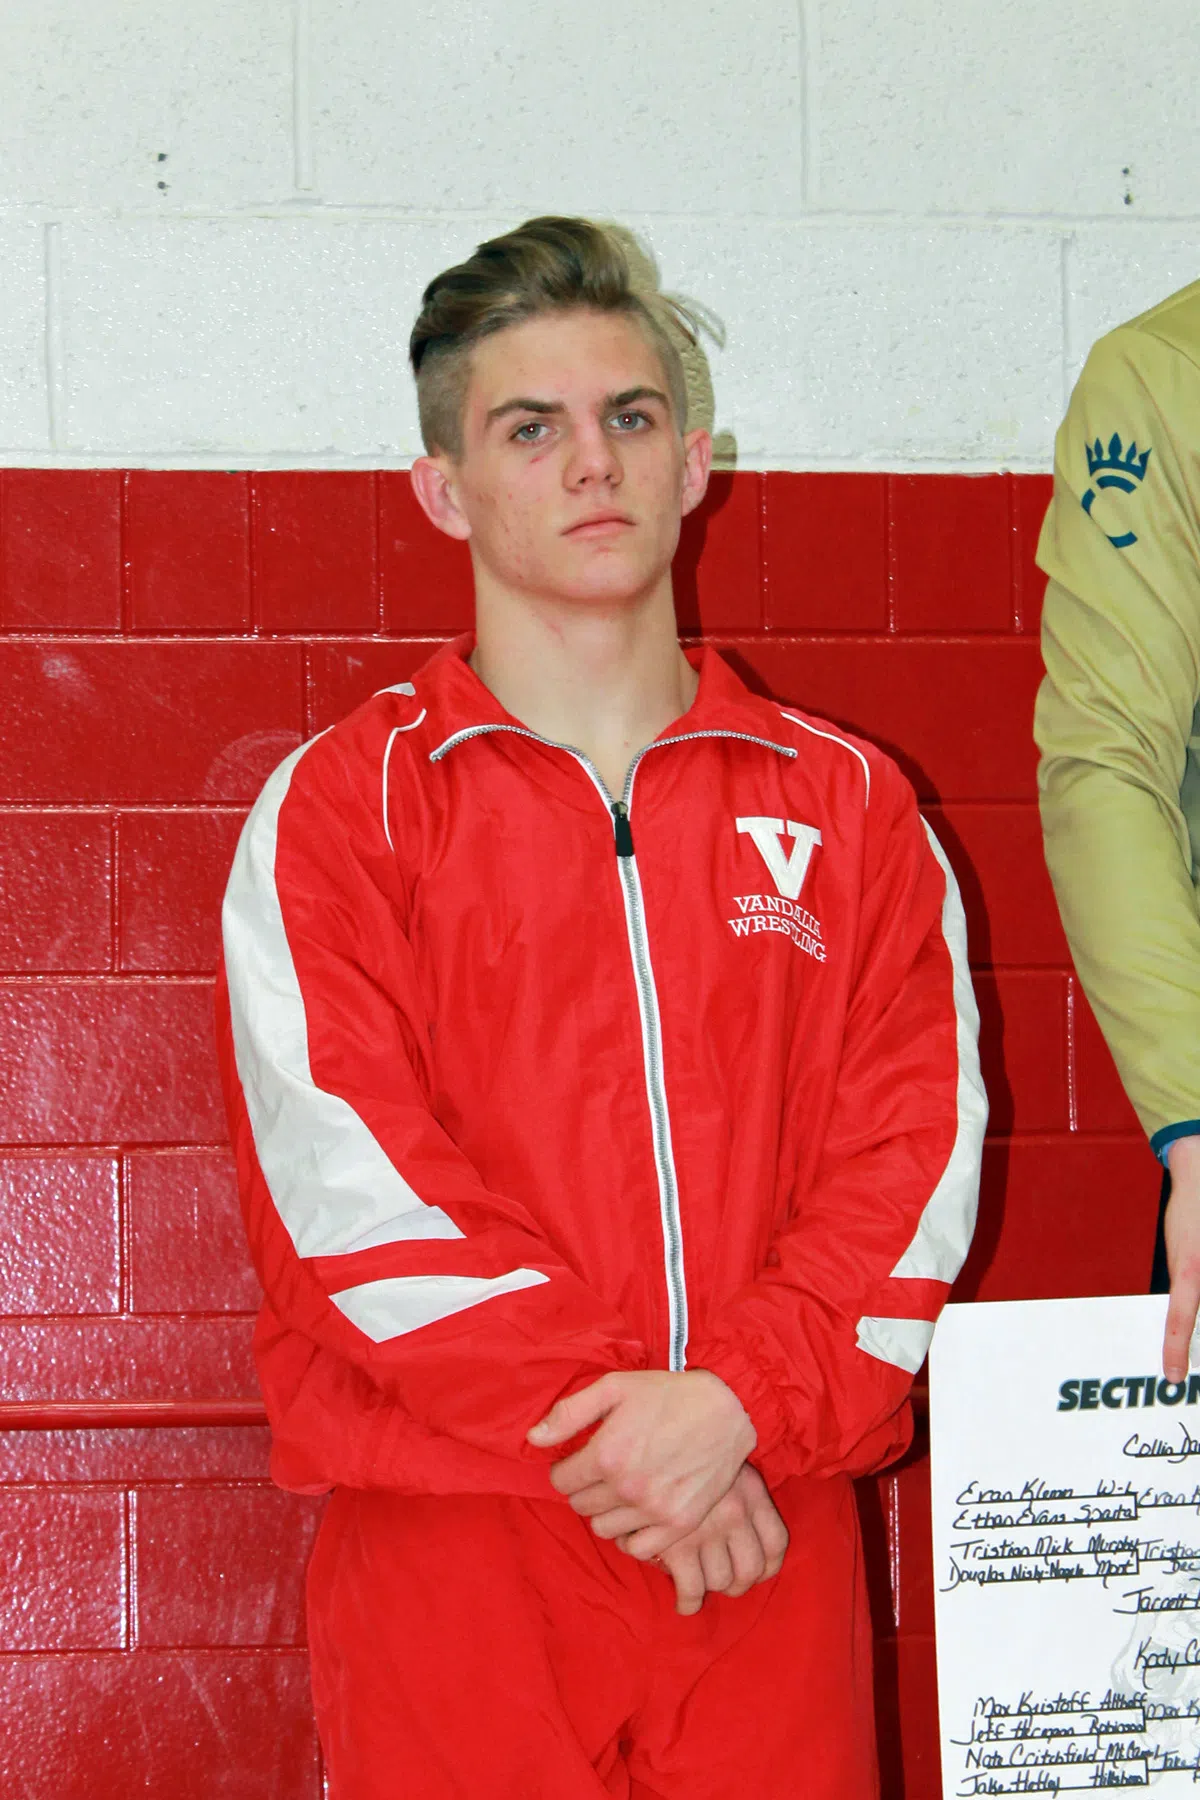 Jarrett Paslay Takes 2nd Place in Individual Wrestling Sectional, Qualifies for State Tournament